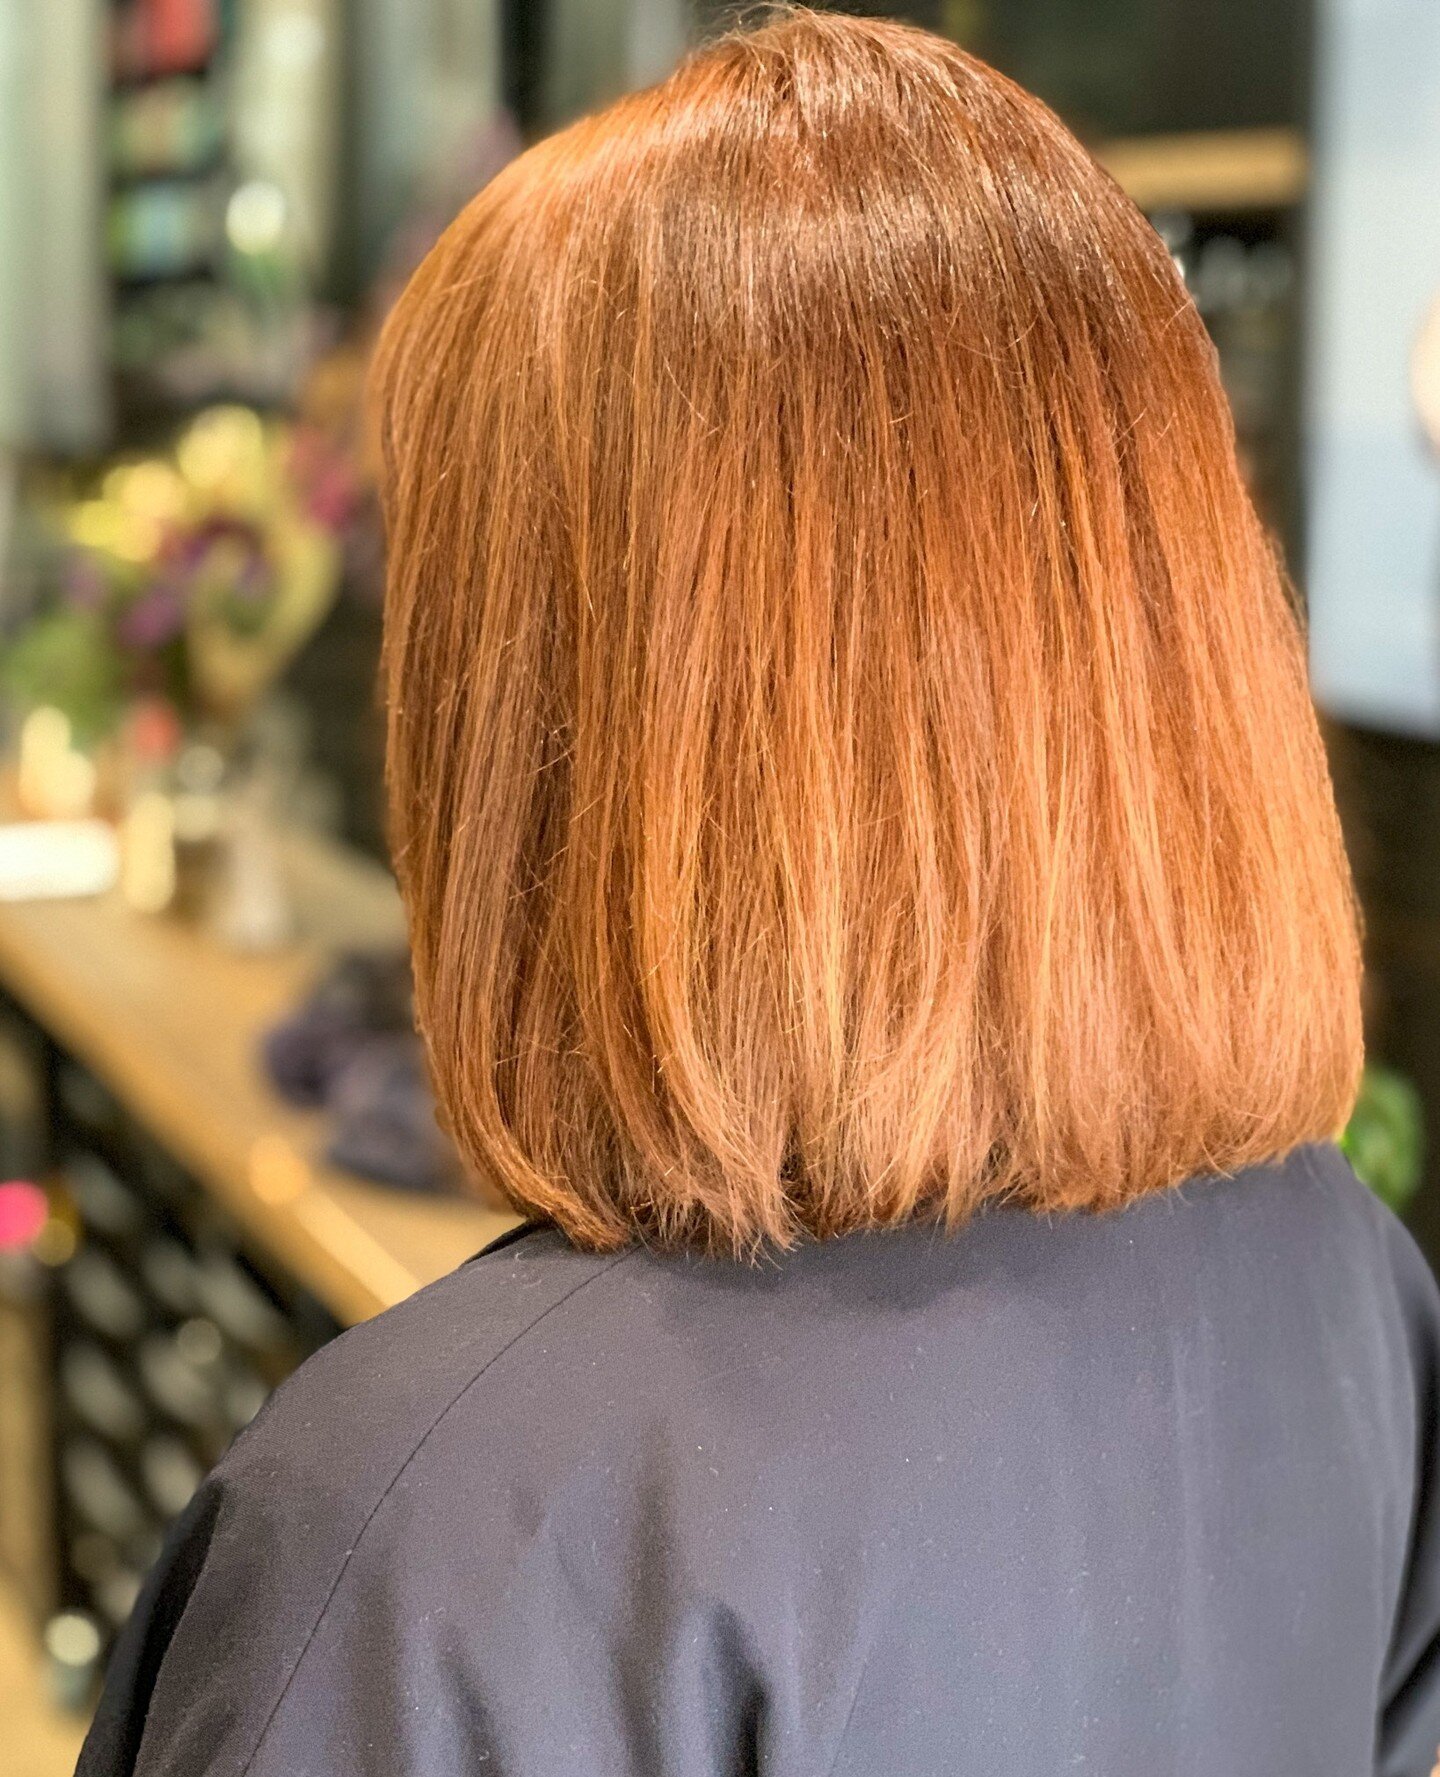 🧡🧡🧡⁠
Swipe to see this STUNNING copper lob before! If you have been waiting for a sign to completely mix up your look and go for that change you've been thinking about for months, here it is! Colour and cut by Tracy. ⁠
⁠
⁠
⁠
⁠
⁠
⁠
#destijlhairsalo